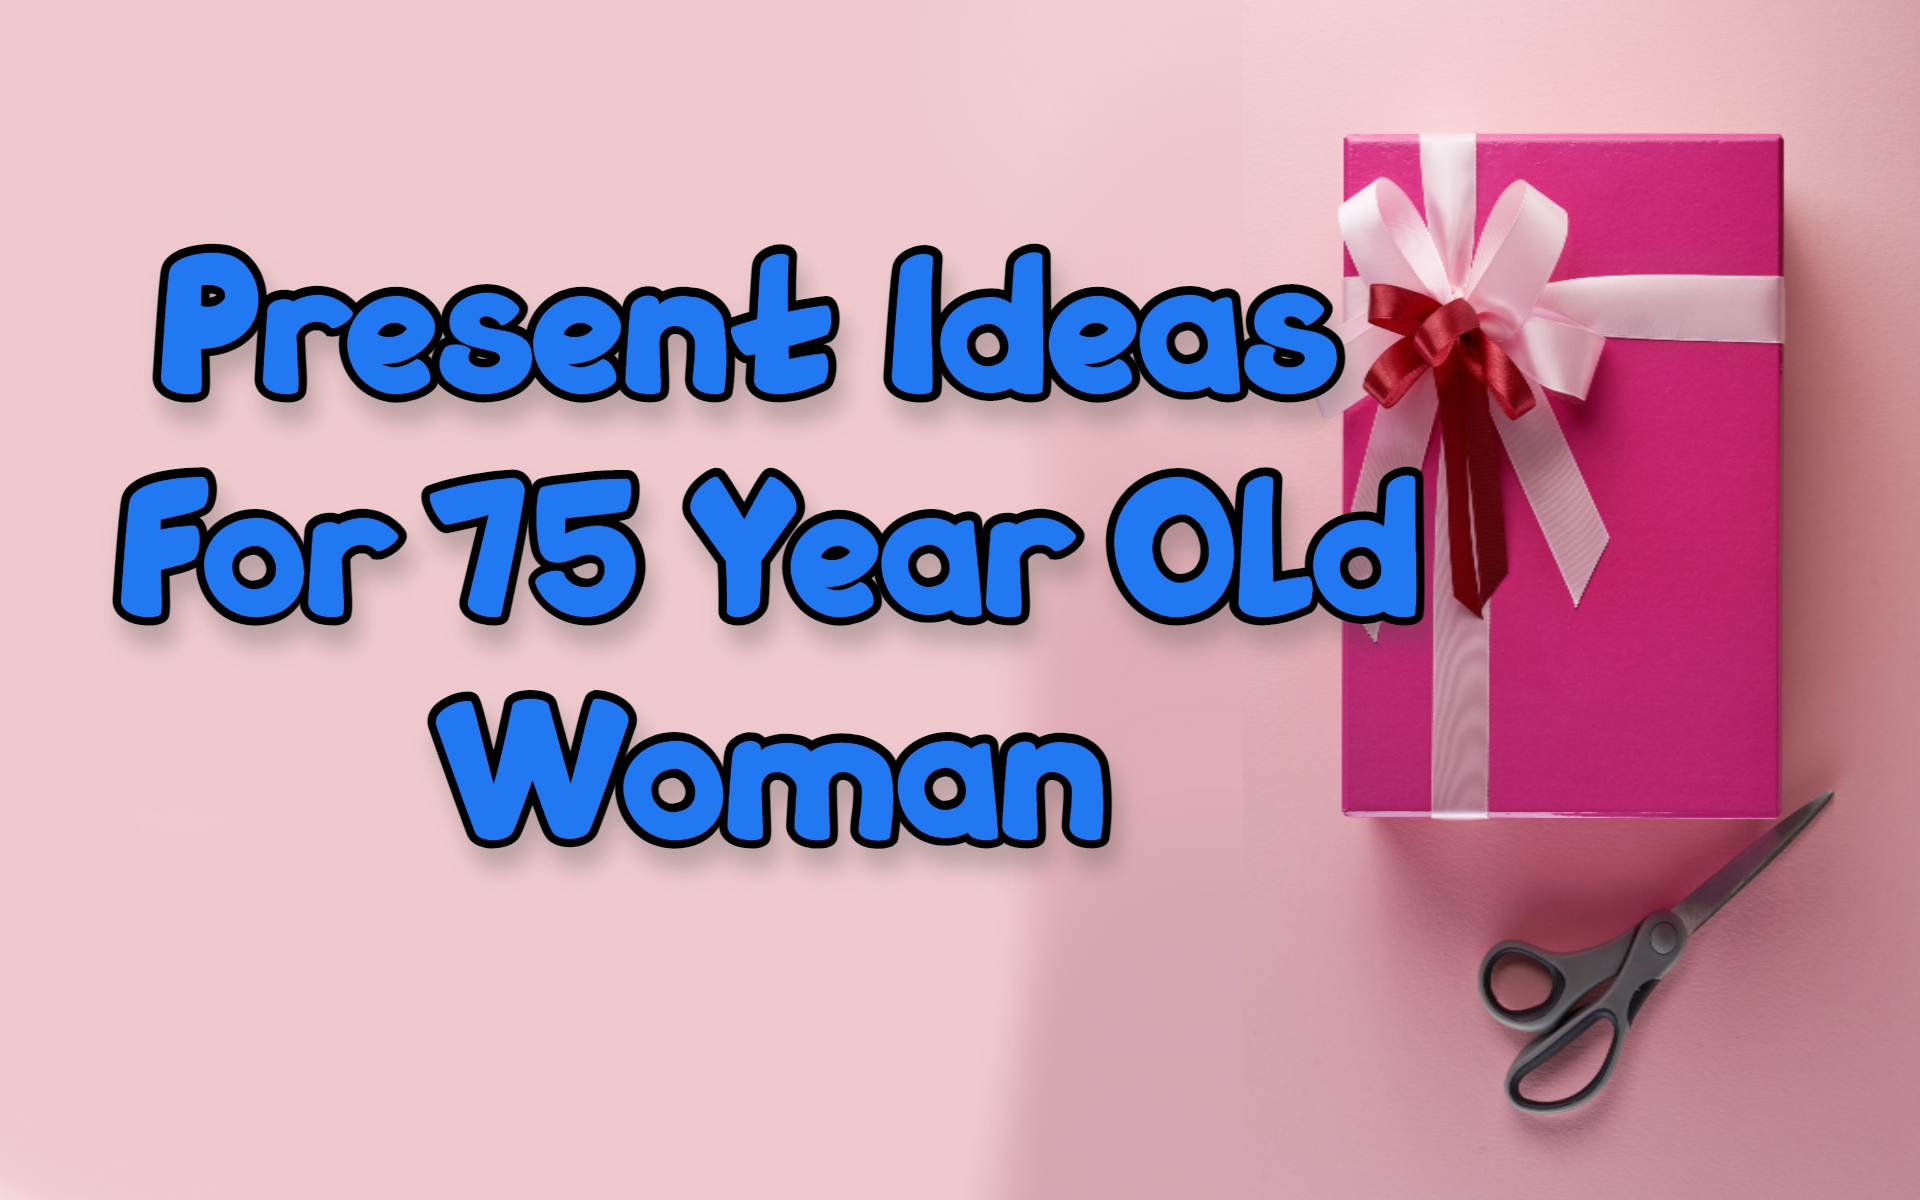 Cover image of gift ideas for 75-year-old woman by Giftsedge